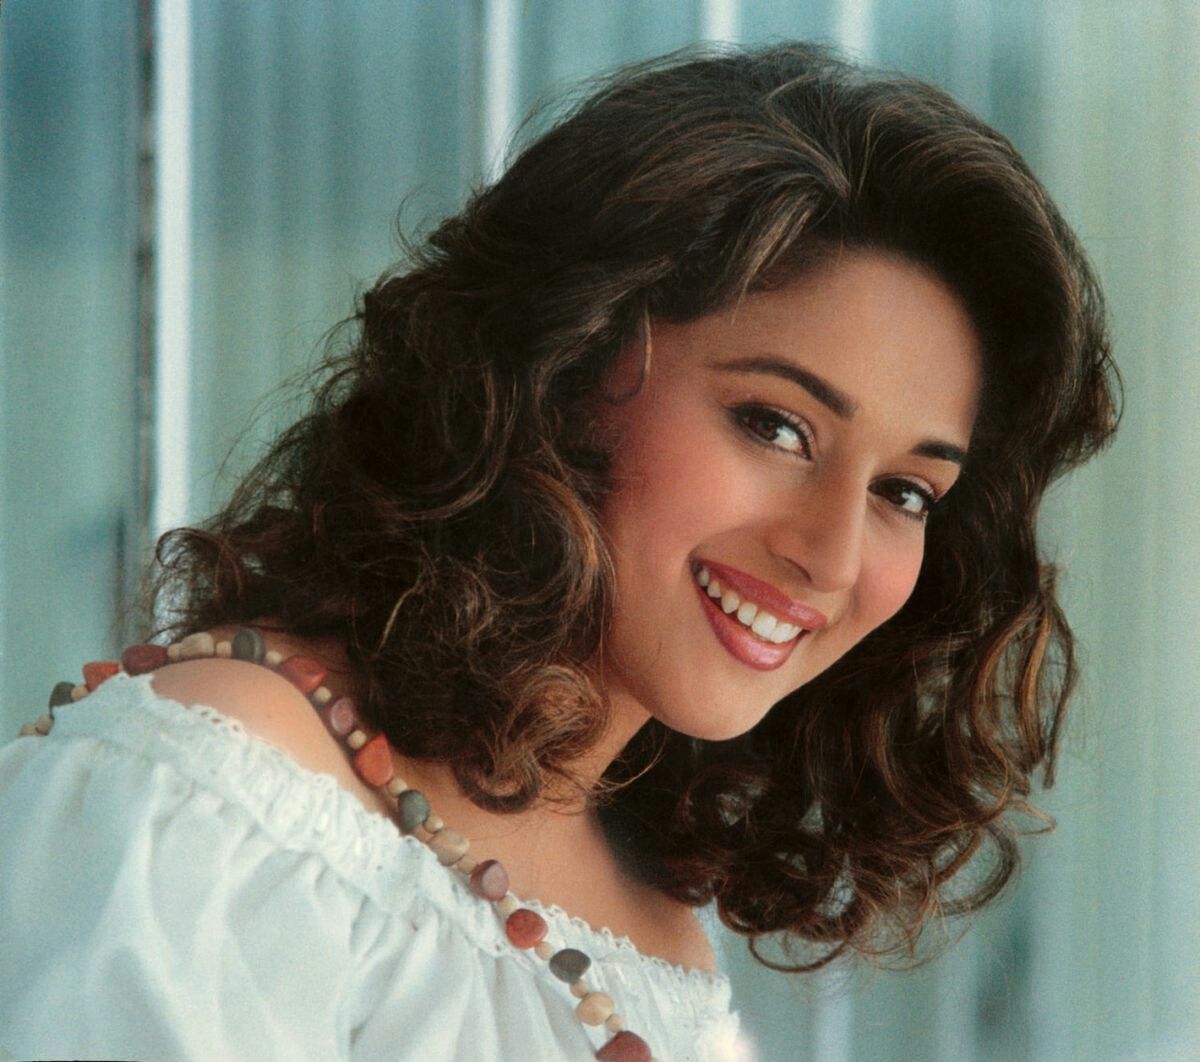 Rare Photo Of Young & Beautiful Madhuri Dixit Facts N' Frames Movies. Music. Health. Tech. Travel. Books. Education